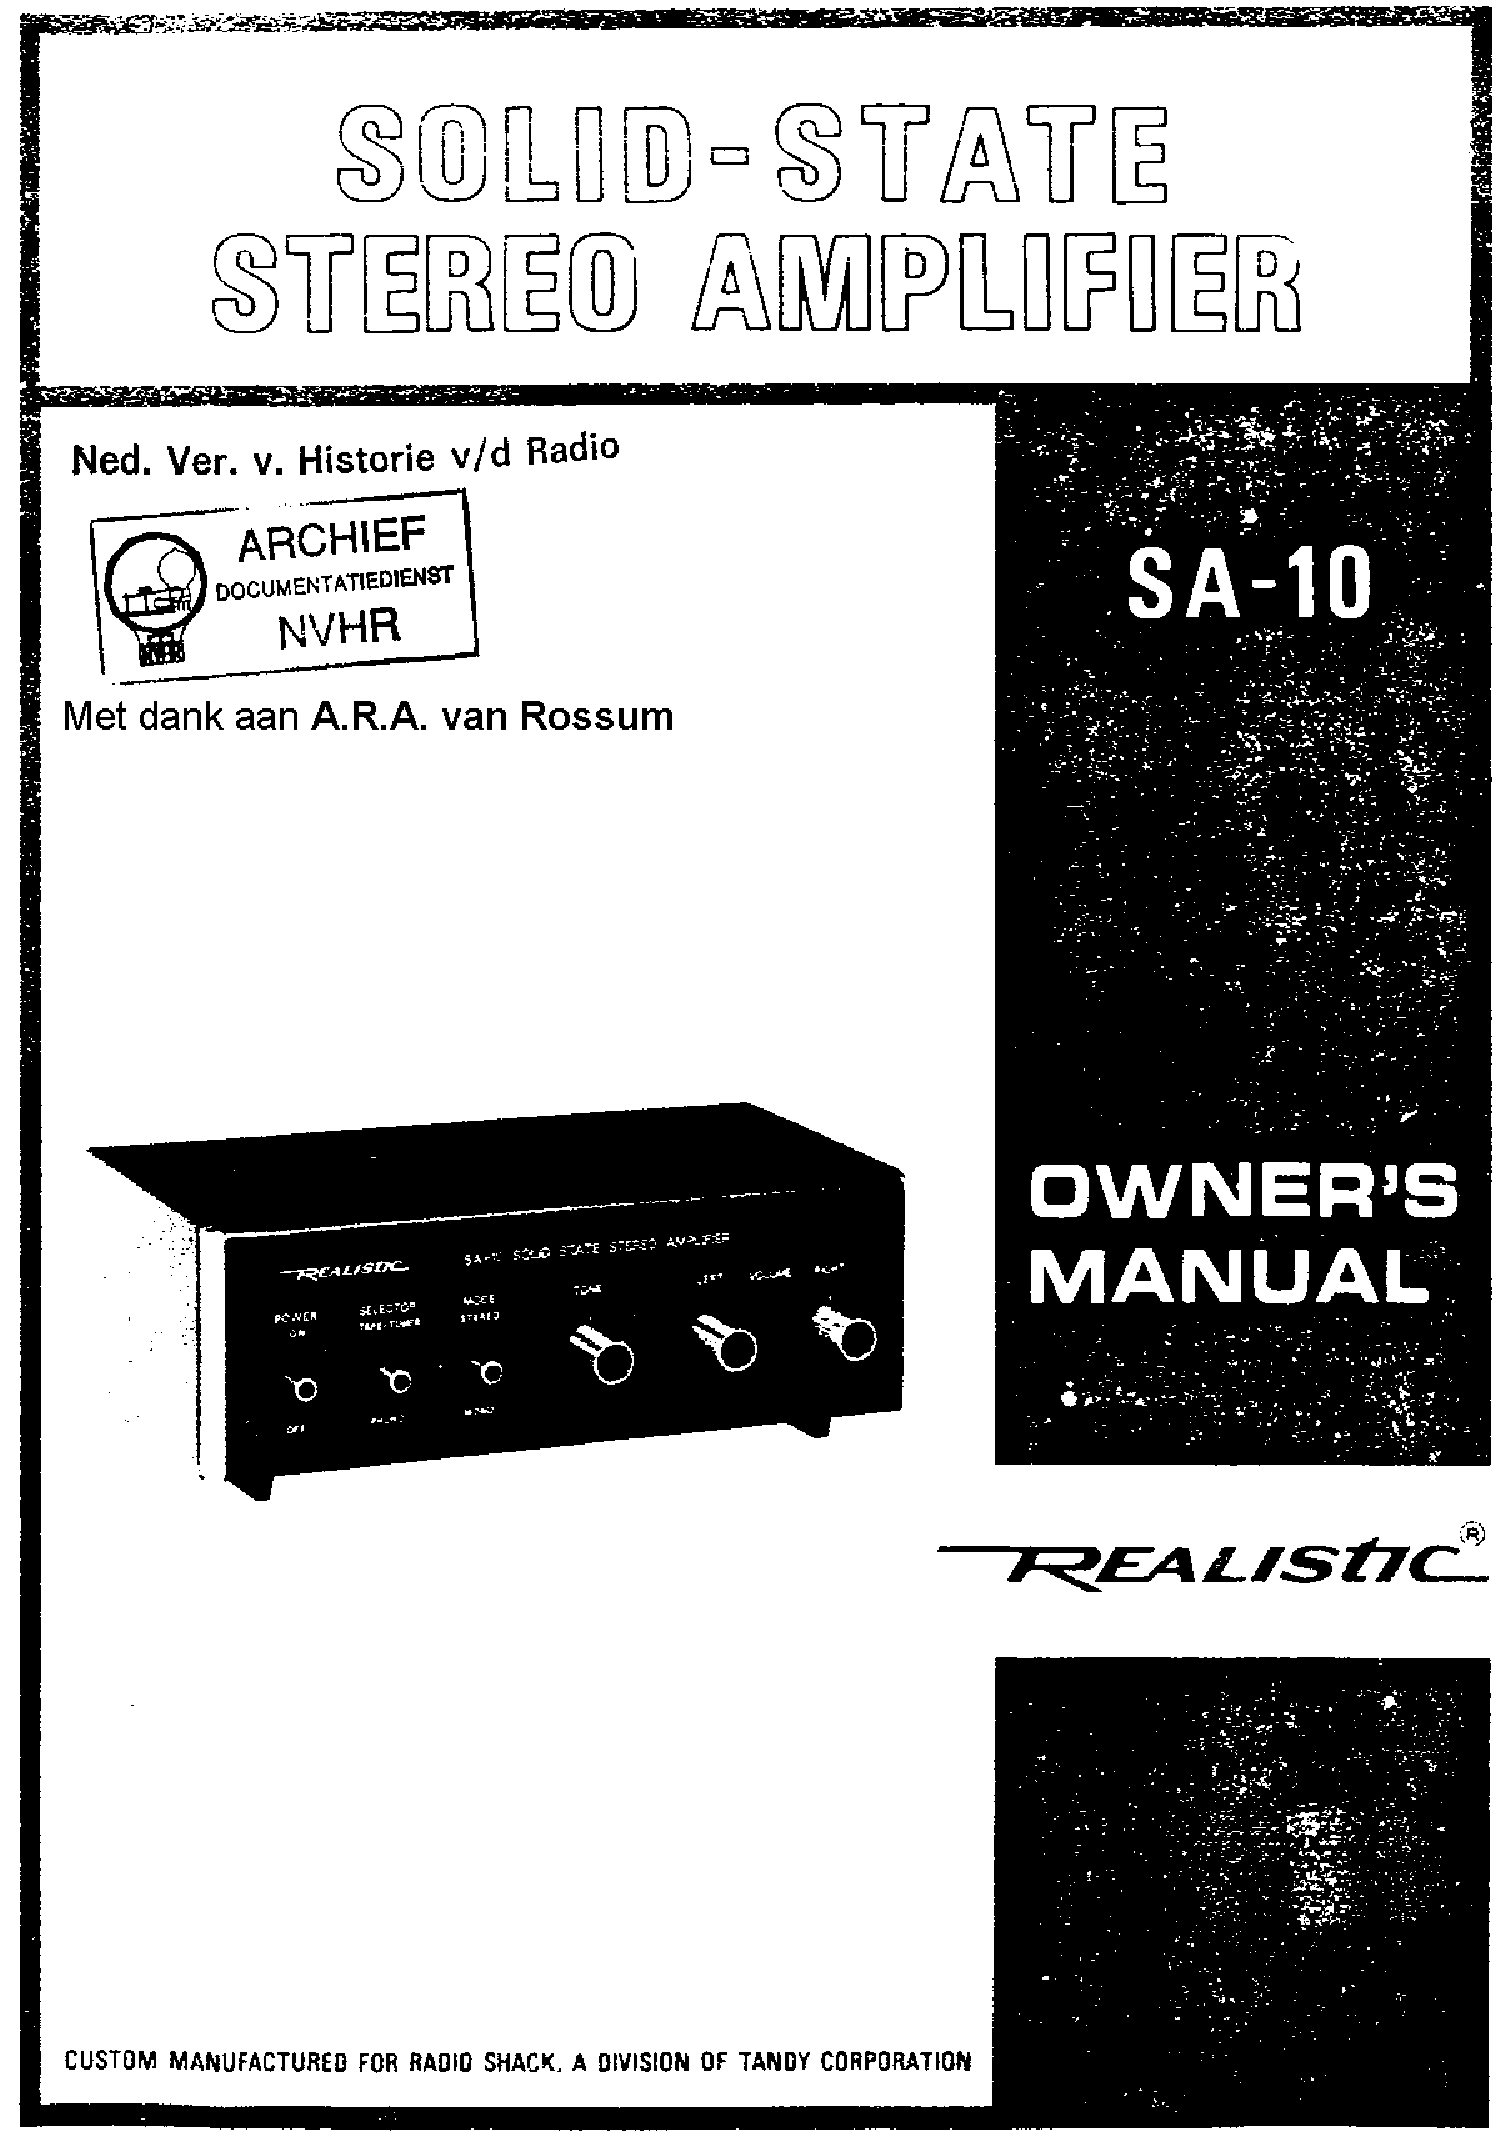 realistic mpa-20 amplifier manual services